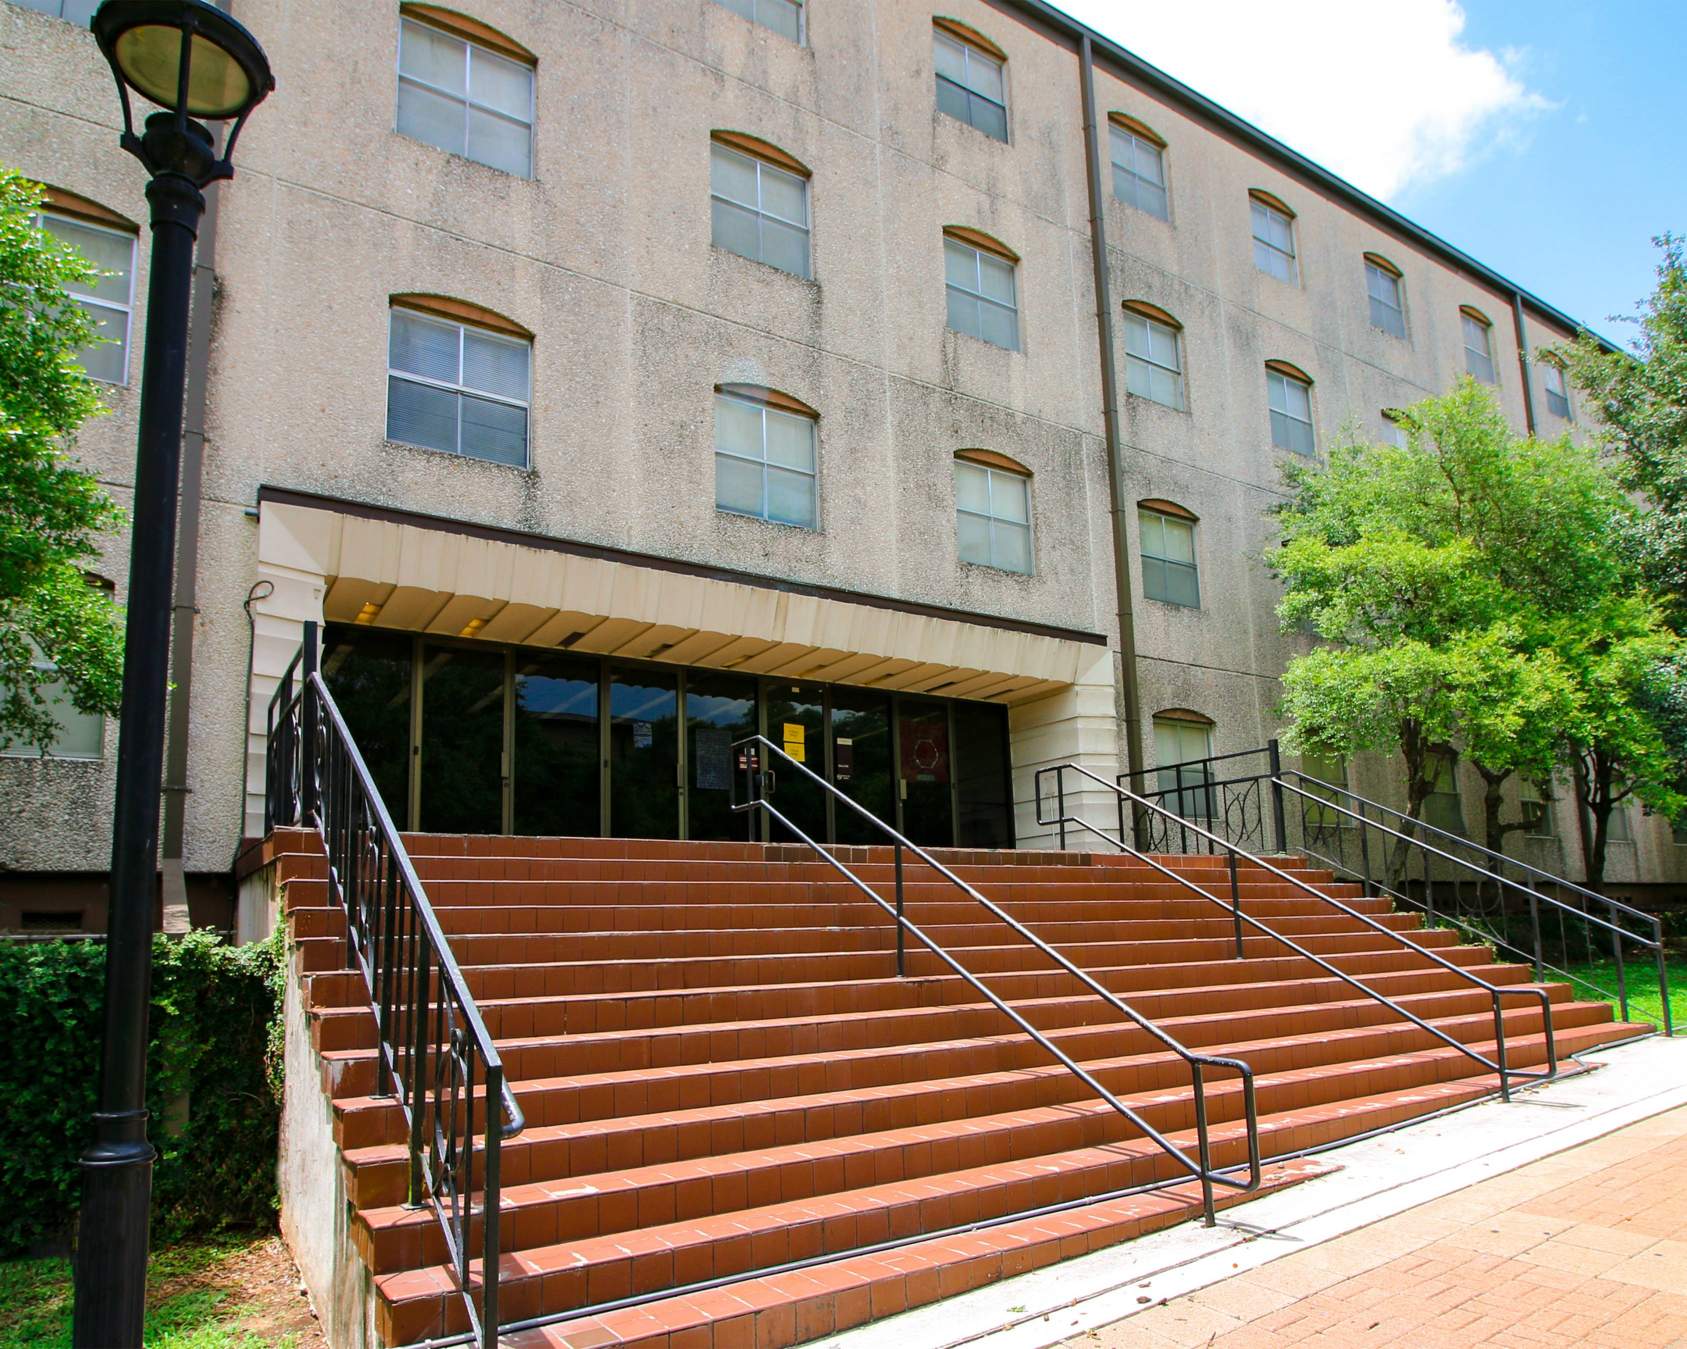 Sterry Hall